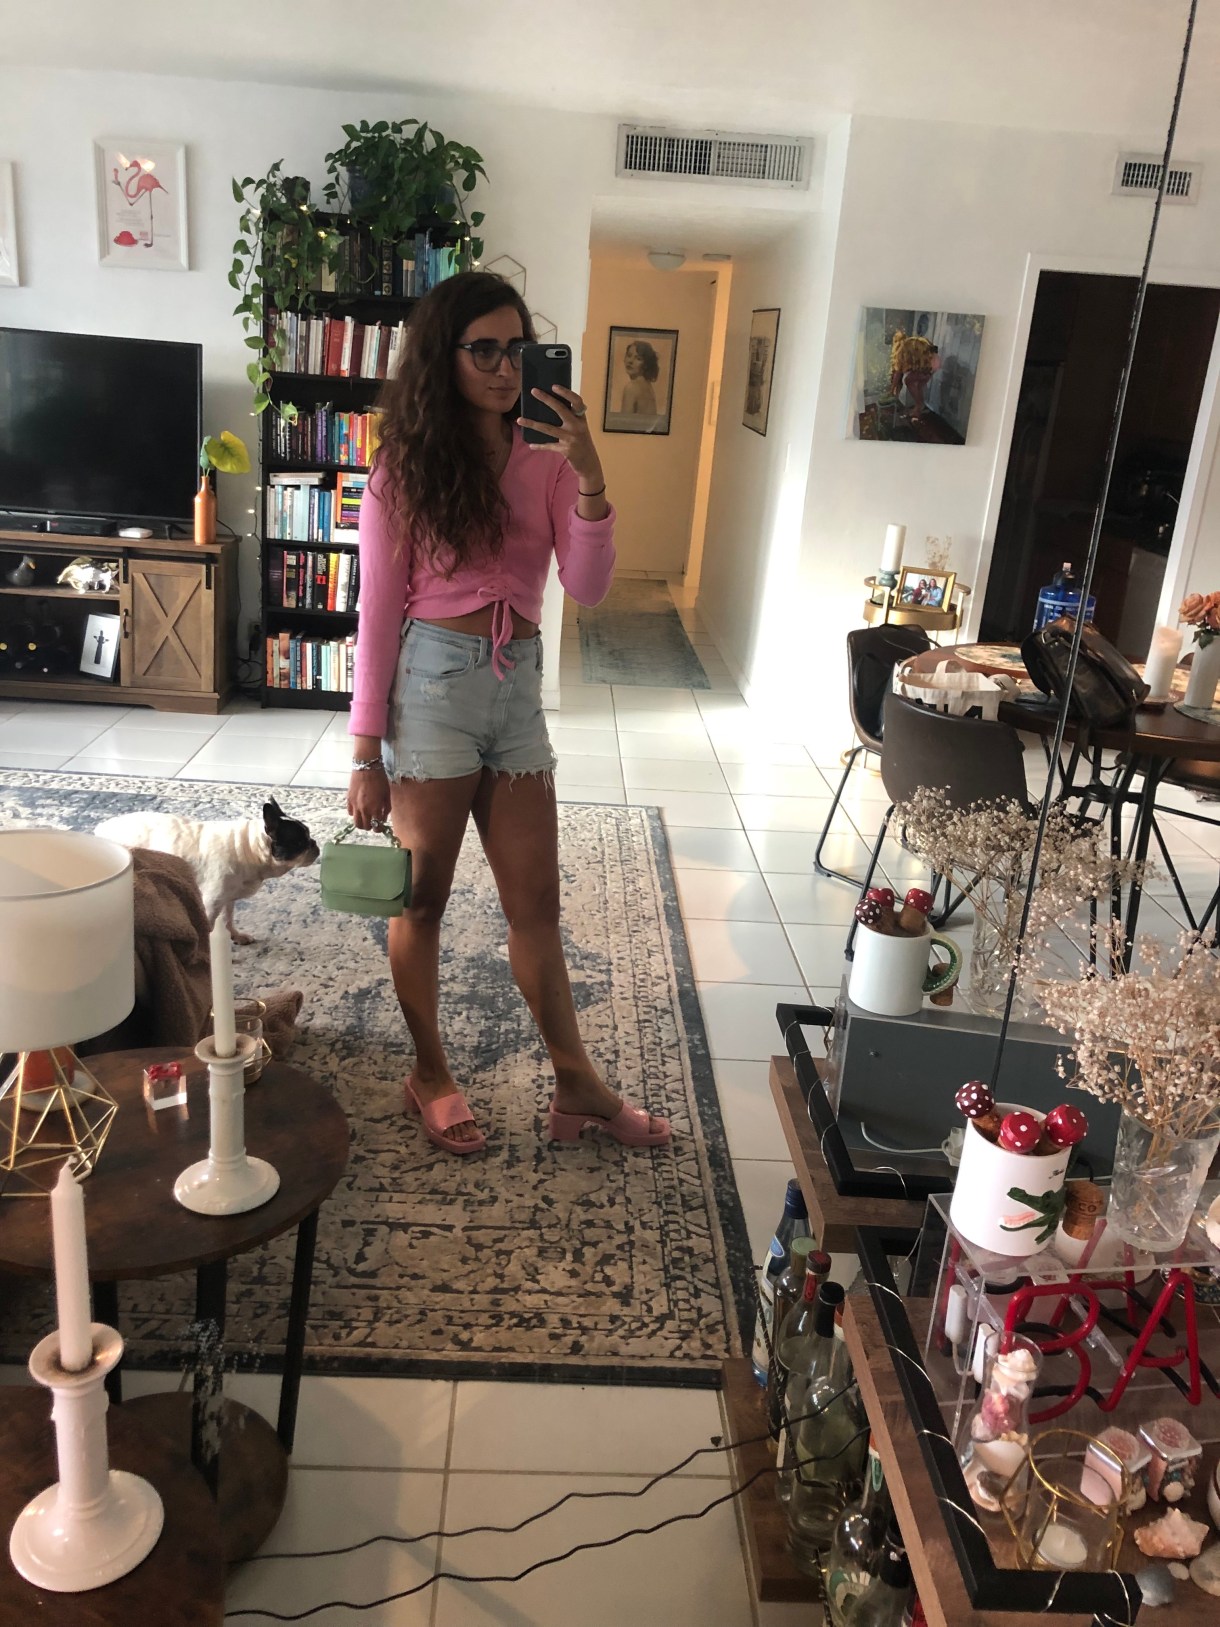 Kayla Kumari Upadhyaya has her hair down and is wearing a long sleeved pink crop top that ties in the middle and cut-off jean shorts and pink heeled slides. She is holding a tiny green purse and taking a mirror selfie in her living room. Lola, a black and white French bulldog, is in the background.